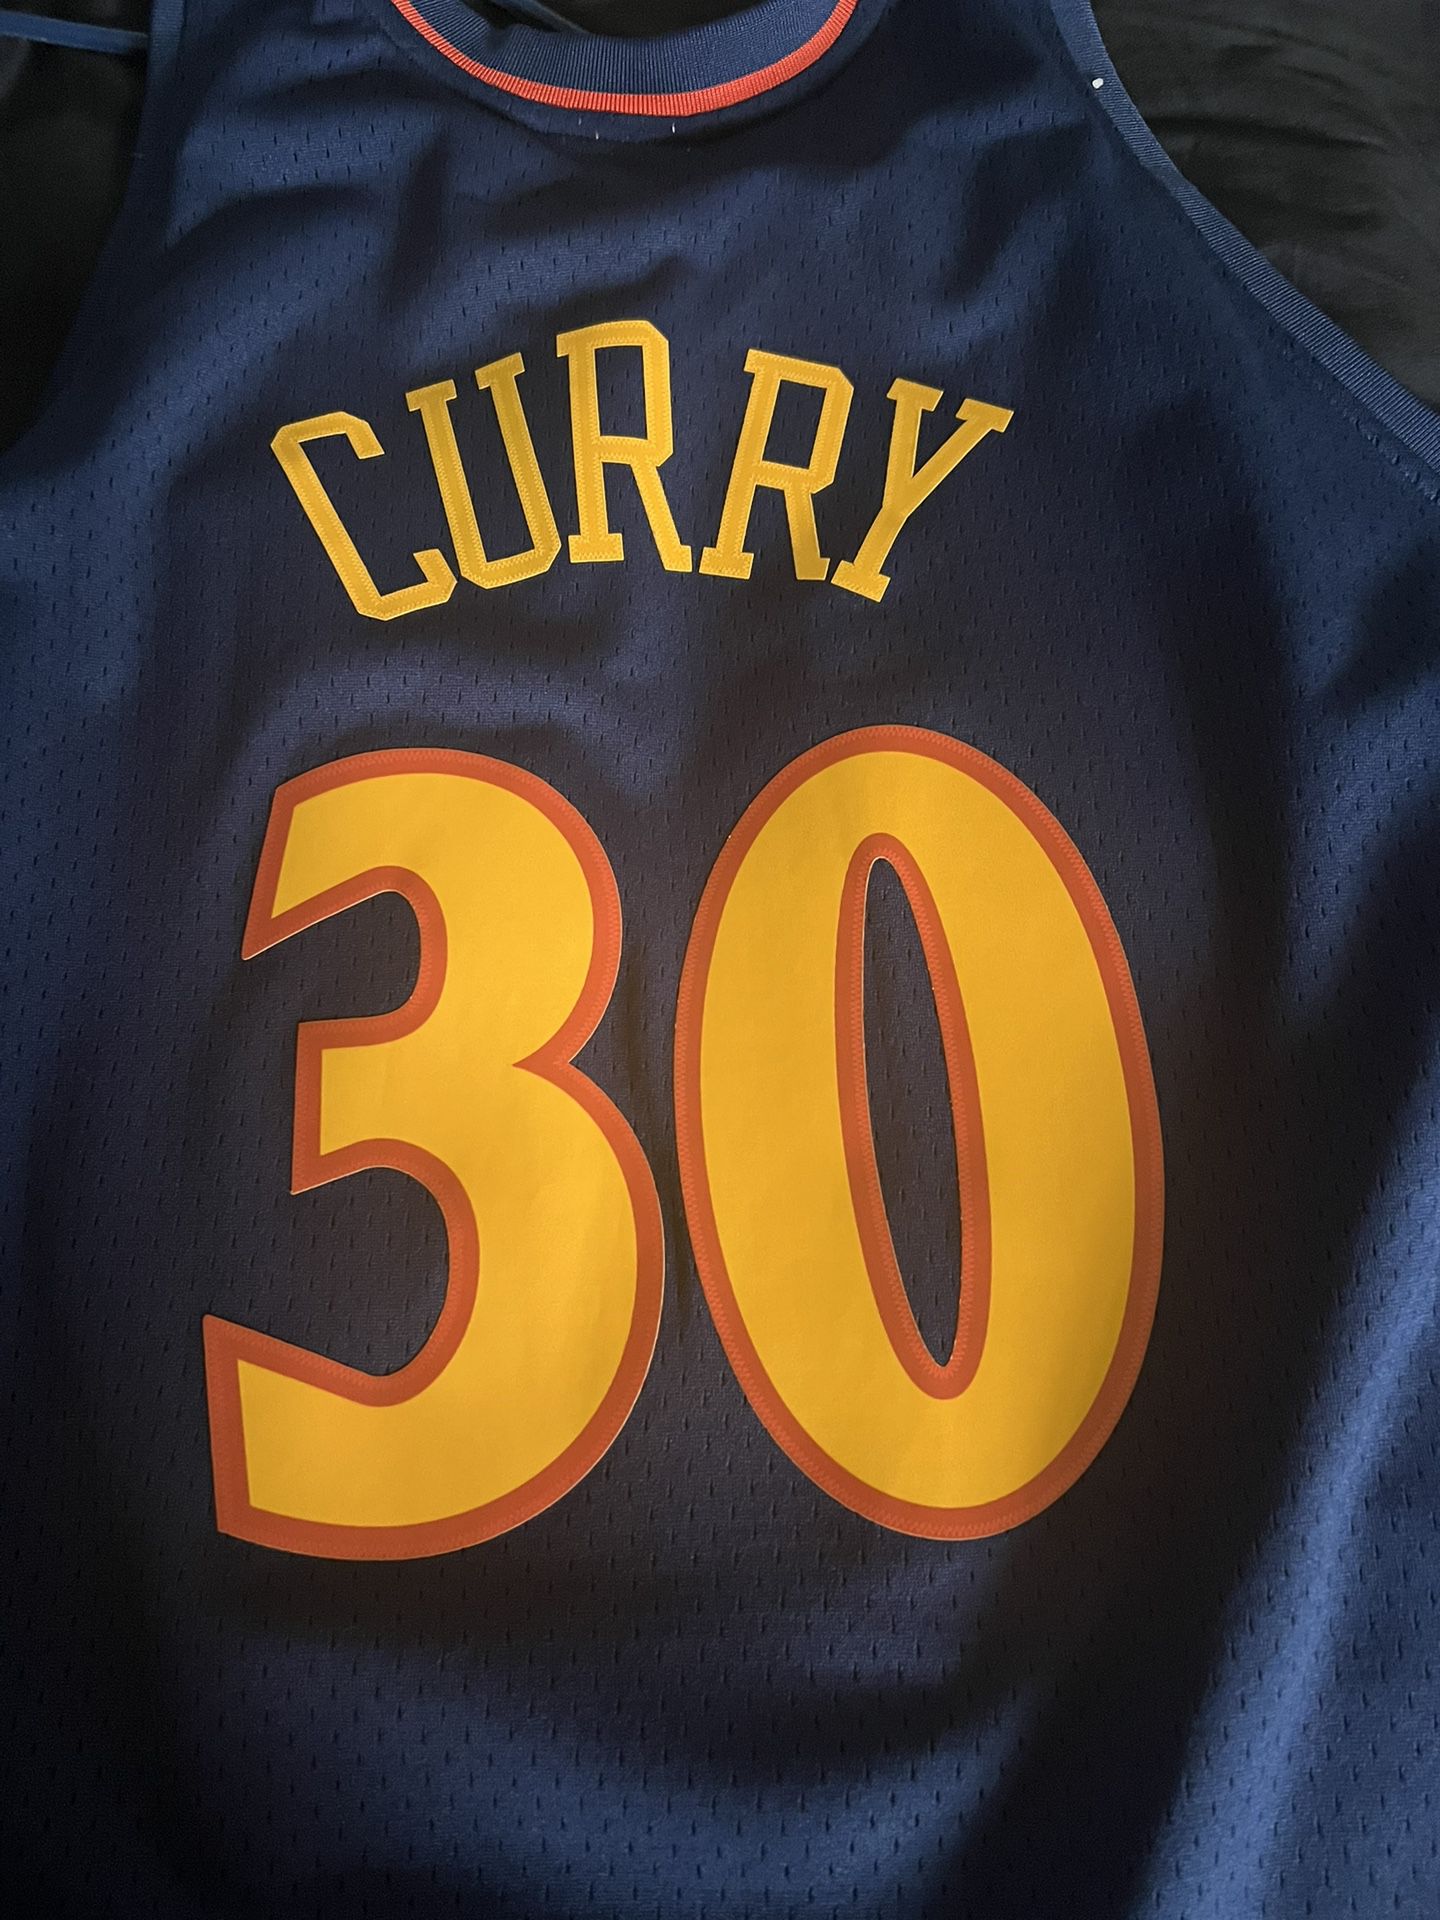 Steph curry 2009-2010 Jersey